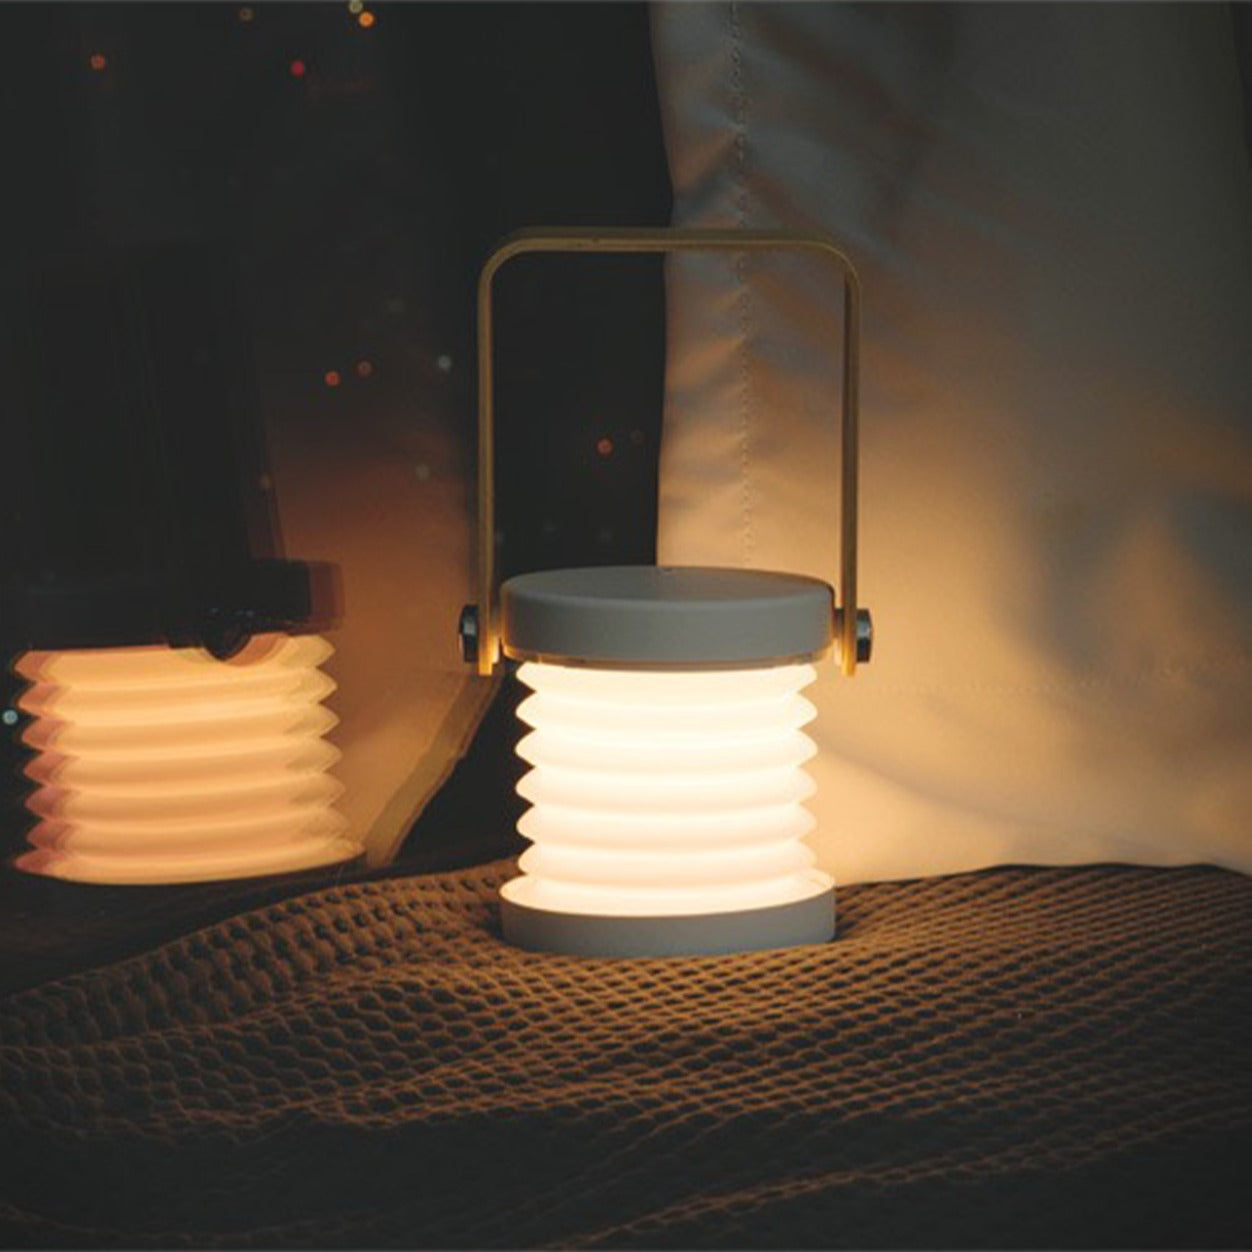 Retractable Table Lamp with USB Rechargeable, on a bed, giving off a warm glow